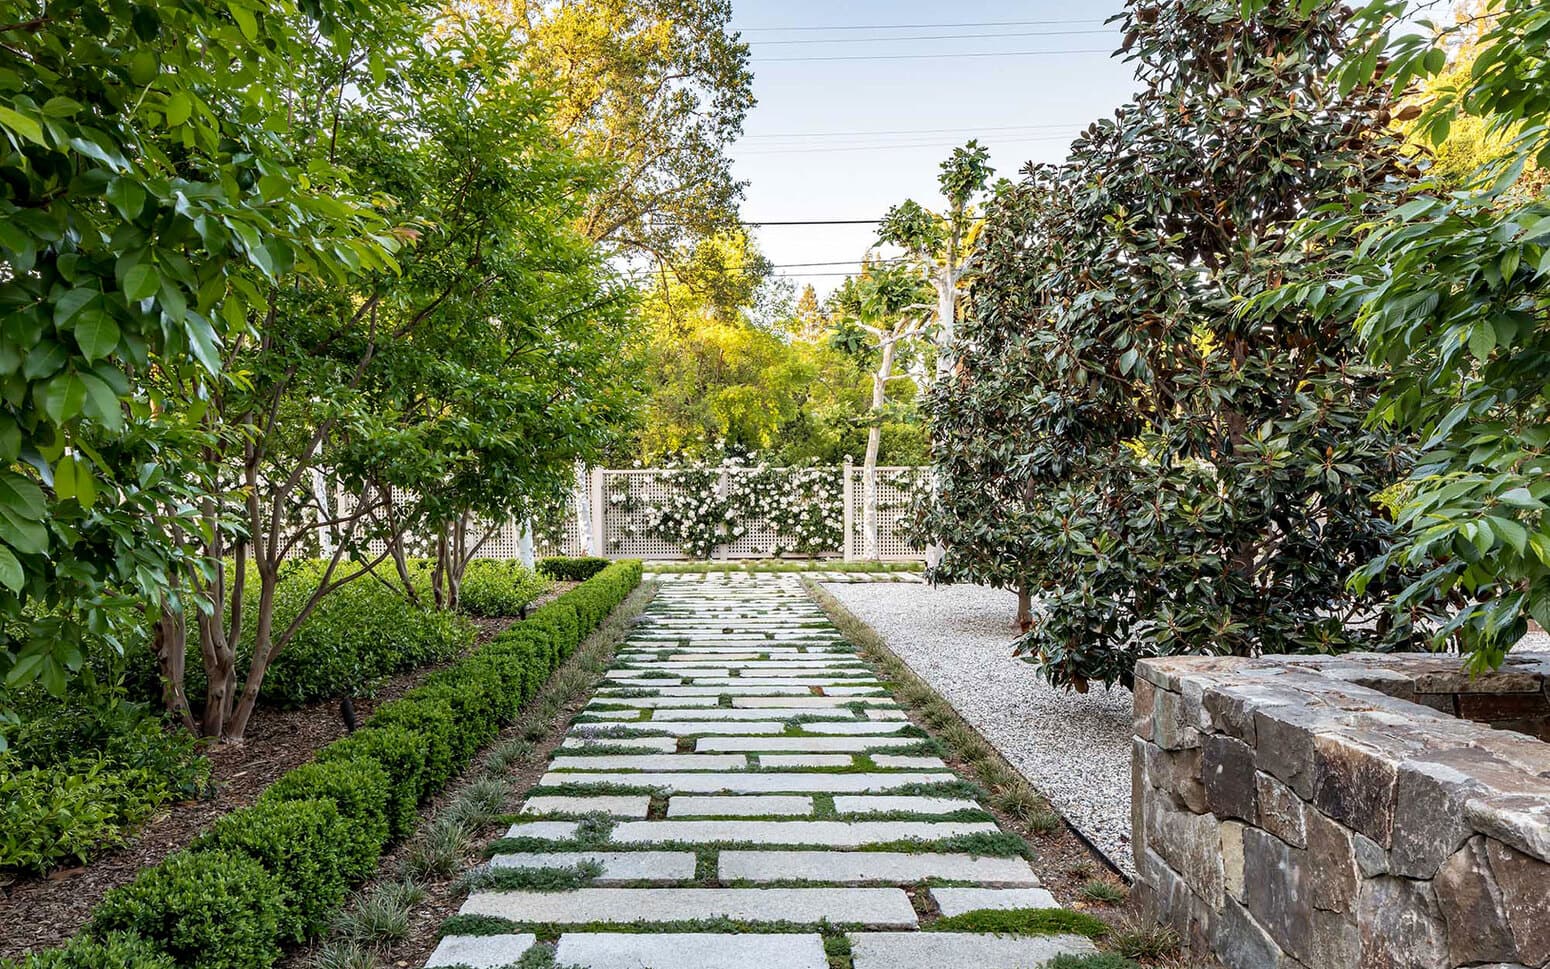 Stone walkway to fence with white roses